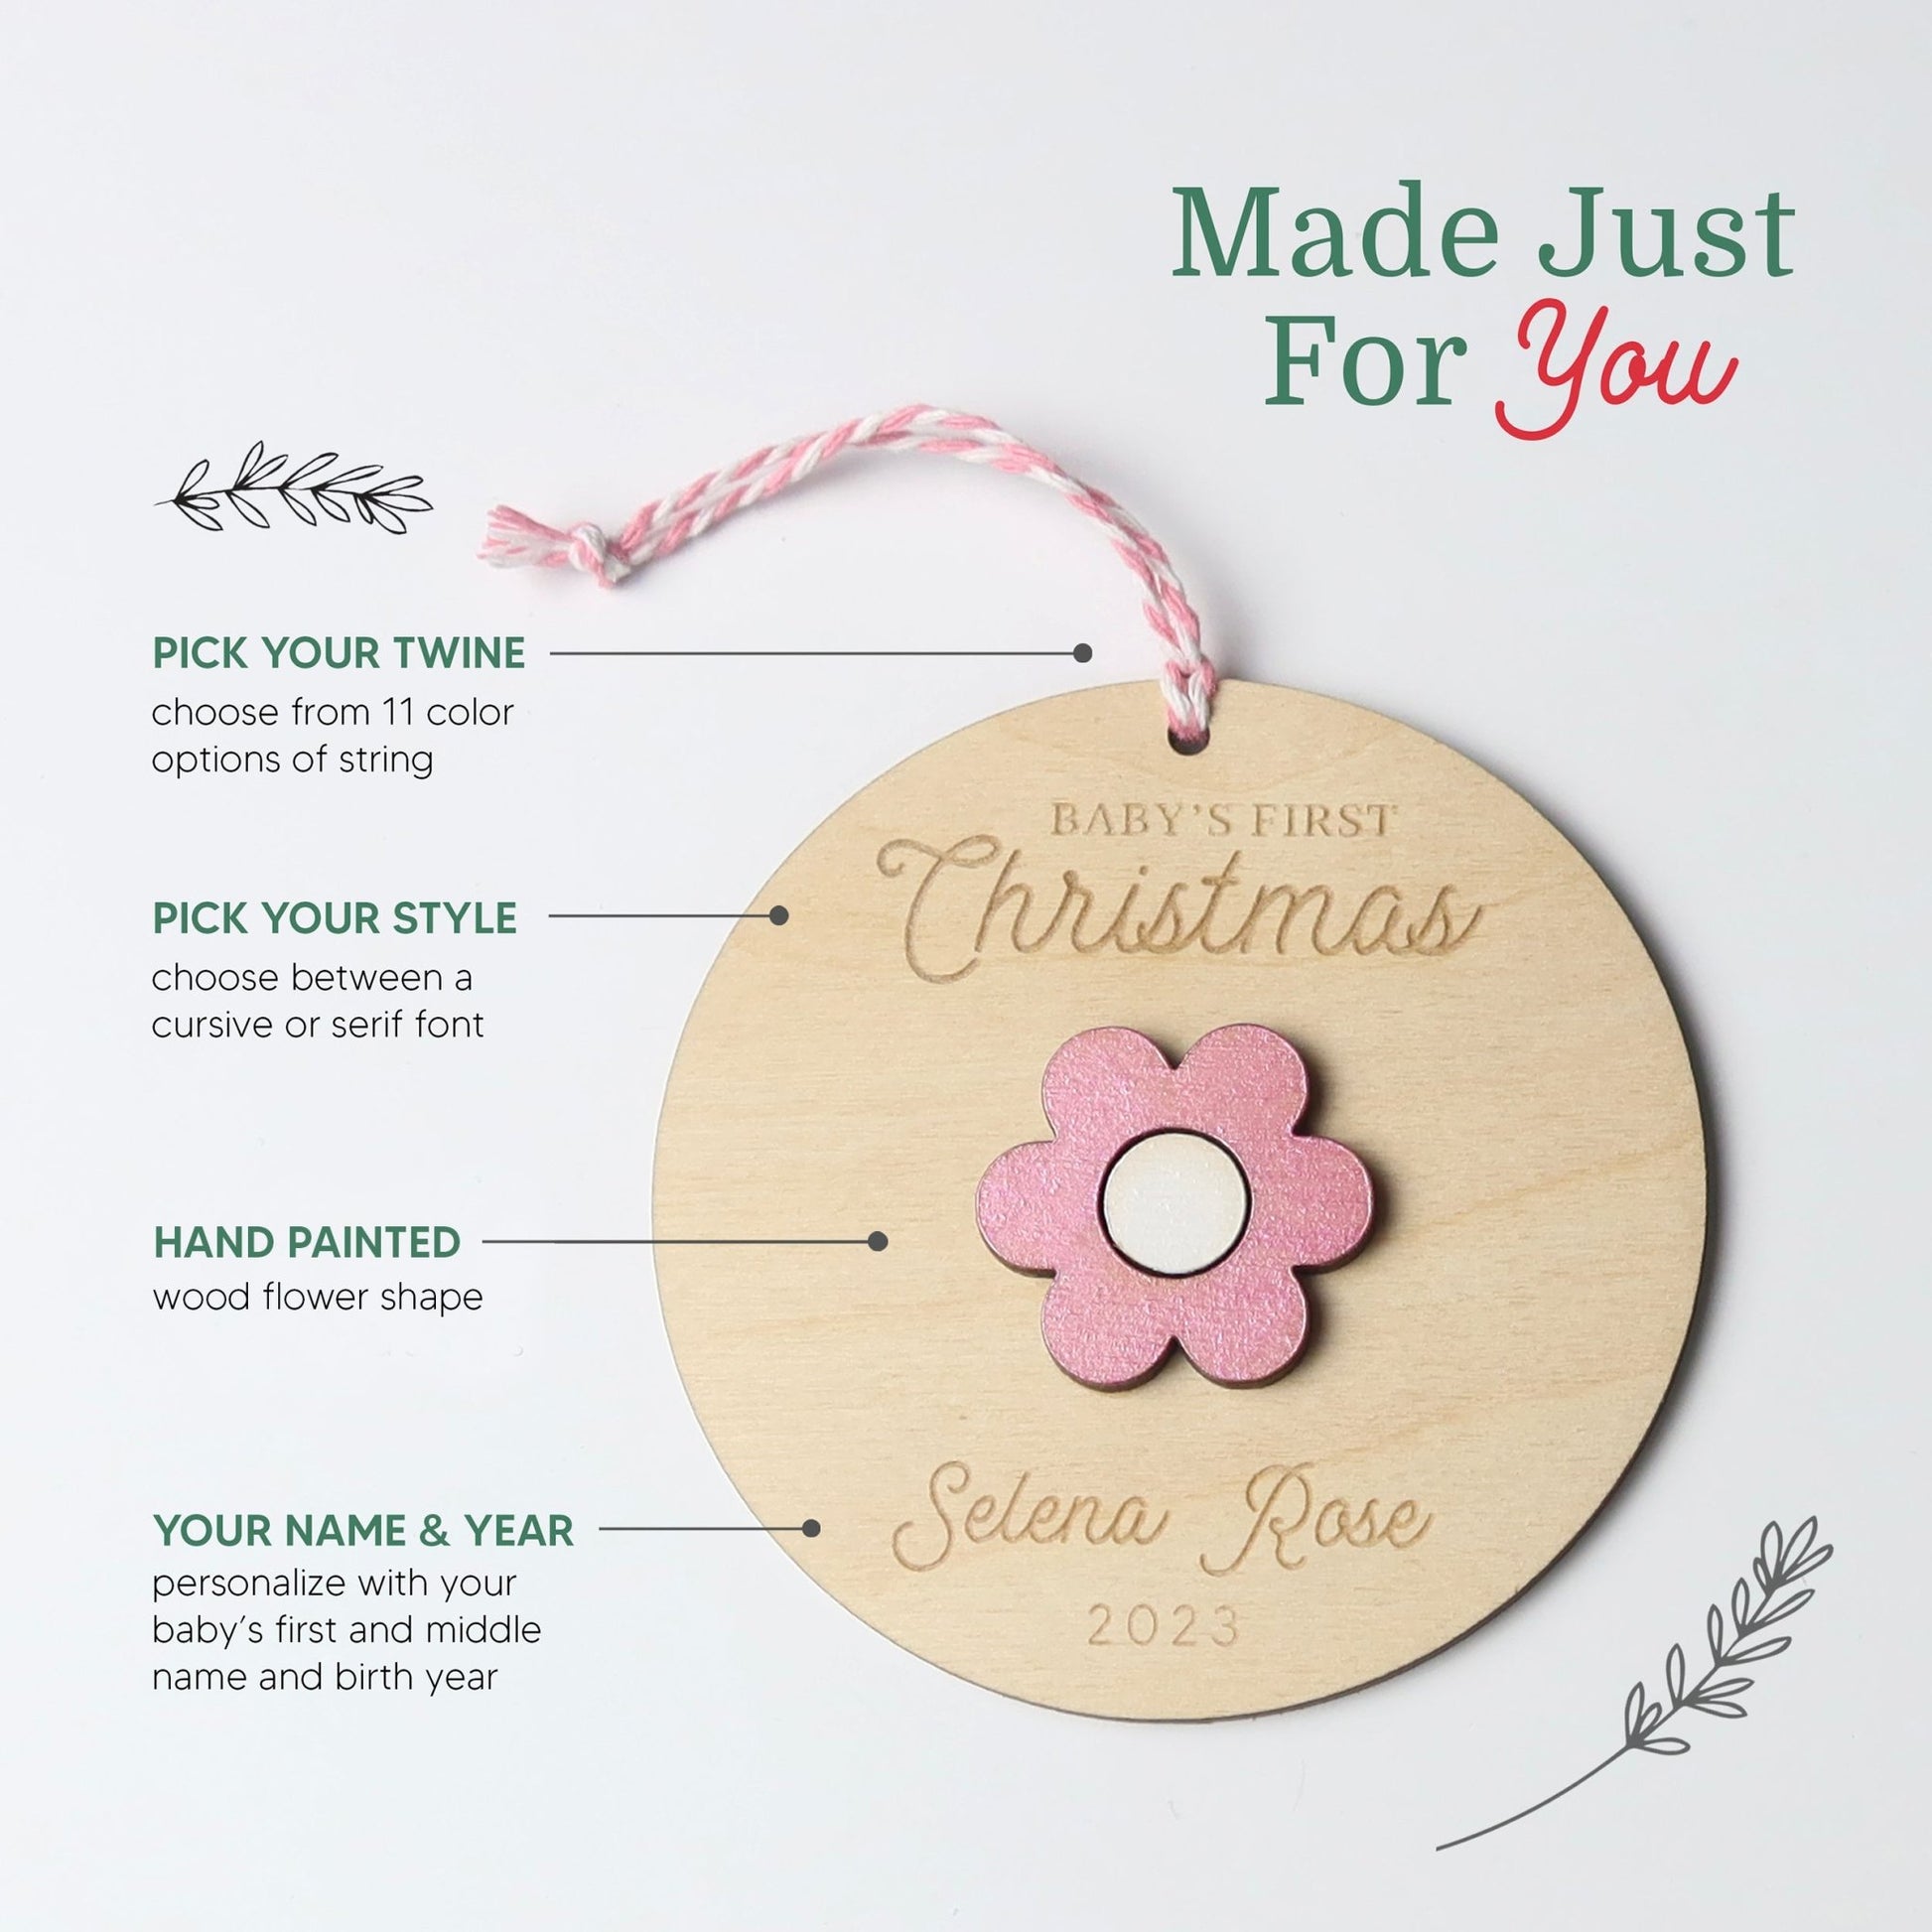 Flower Baby's First Christmas Ornament Personalized - Holiday Ornaments - Moon Rock Prints